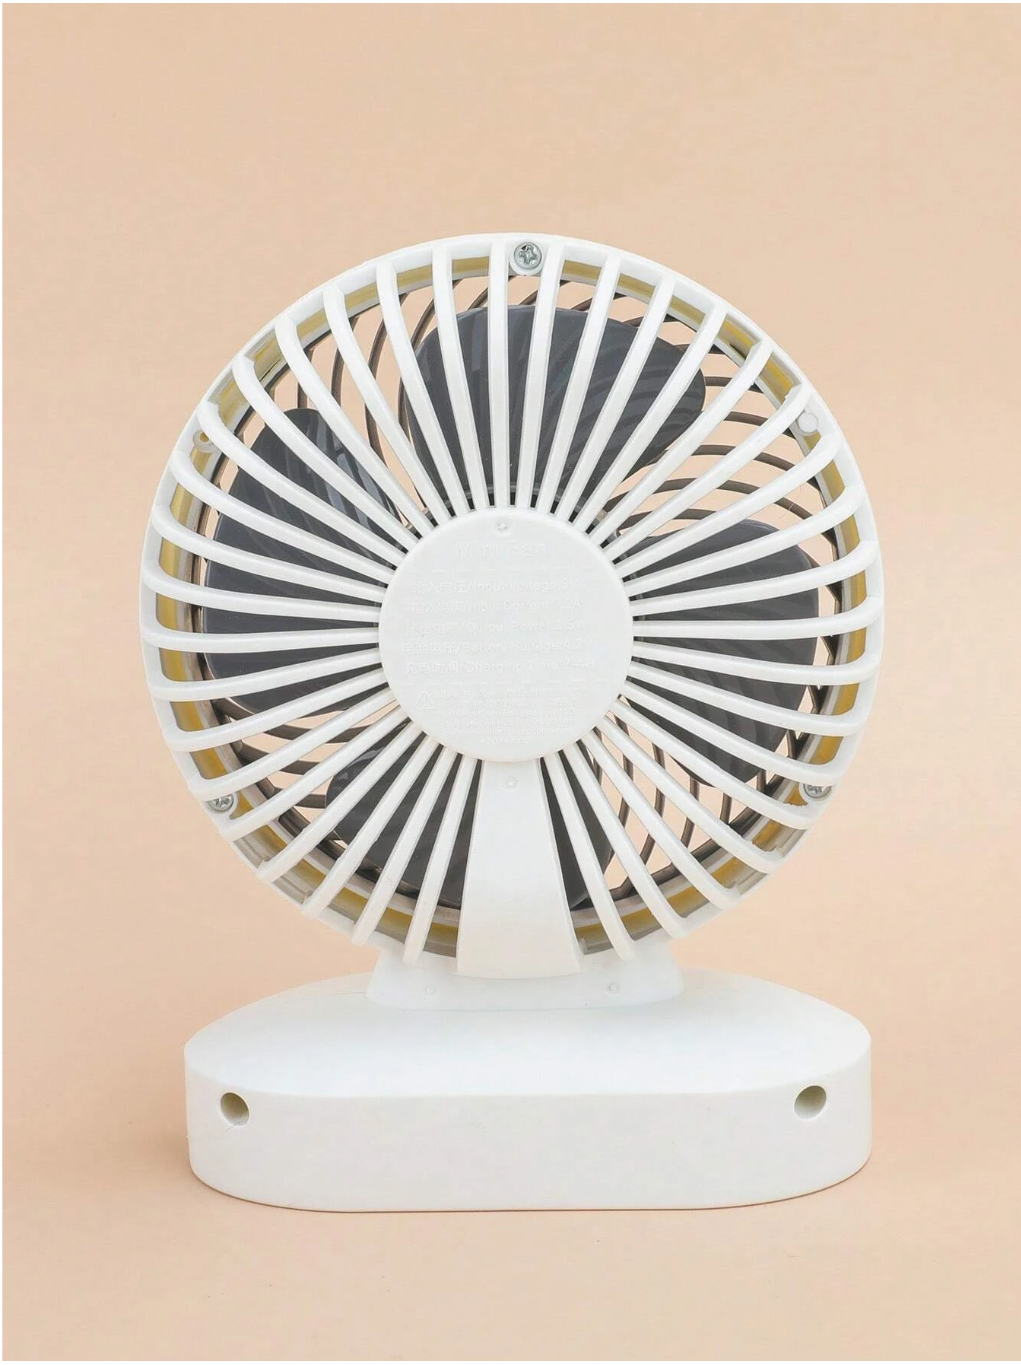 Beat the Heat in Style: Modernist 1pc Plastic Desk Fan with Data Line for a Cool Home Oasis!